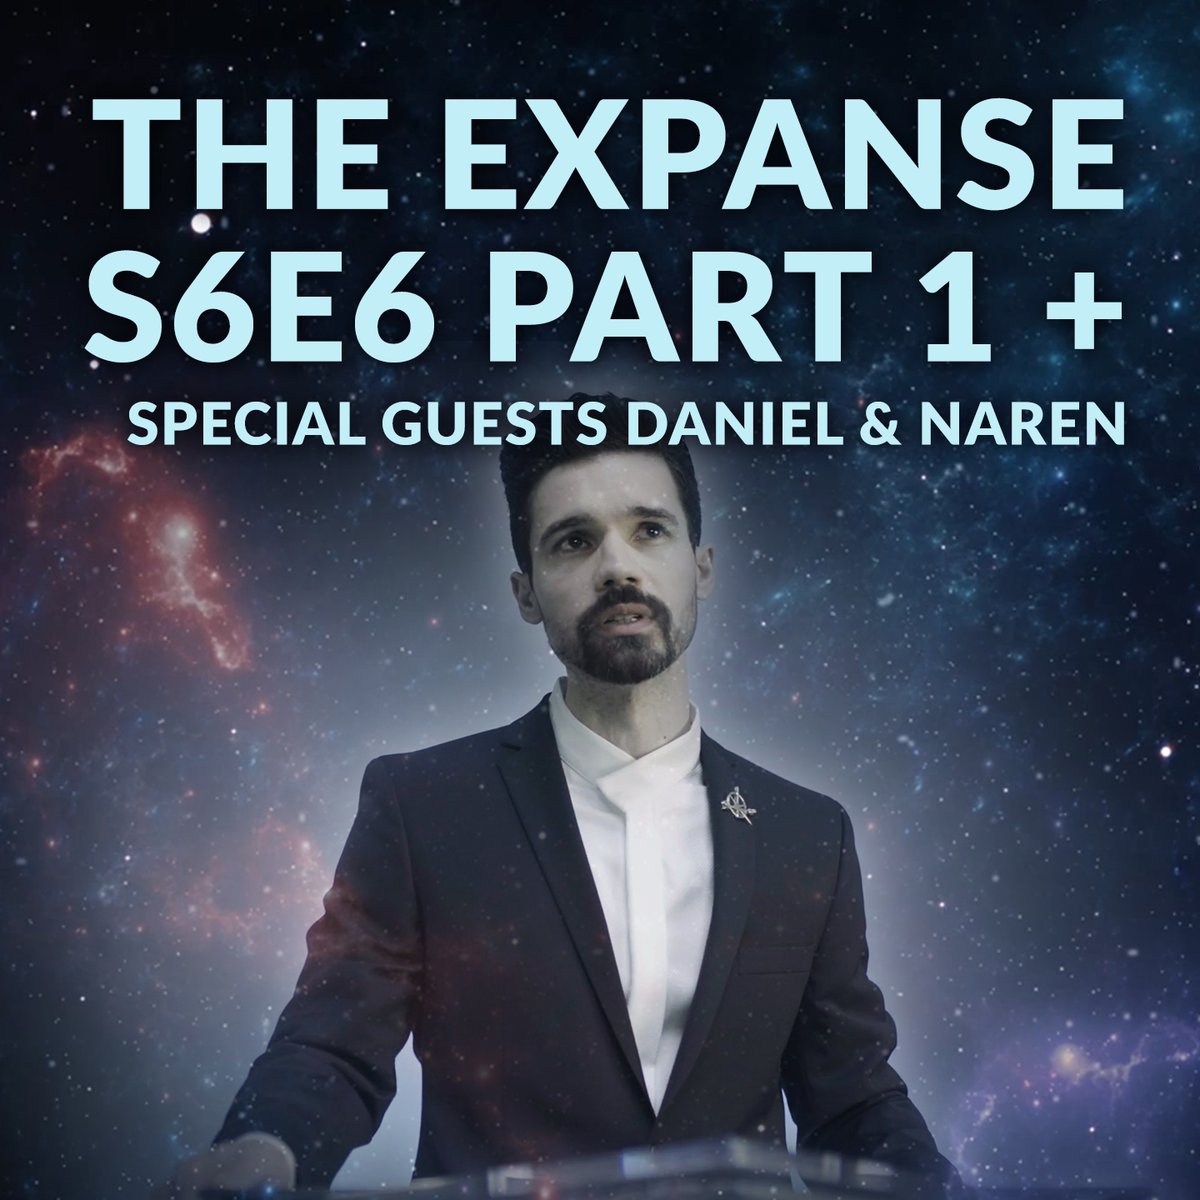 THE EXPANSE S6E6 PART 1 + @AbrahamHanover + Naren Shankar is out! 👉Apple tyandthatguy.com/a115 👉Soptify tyandthatguy.com/s115 Please support us... SUBSCRIBE TO THE #PODCAST & LEAVE A REVIEW linktr.ee/tyandthatguy #TyandThatGuy